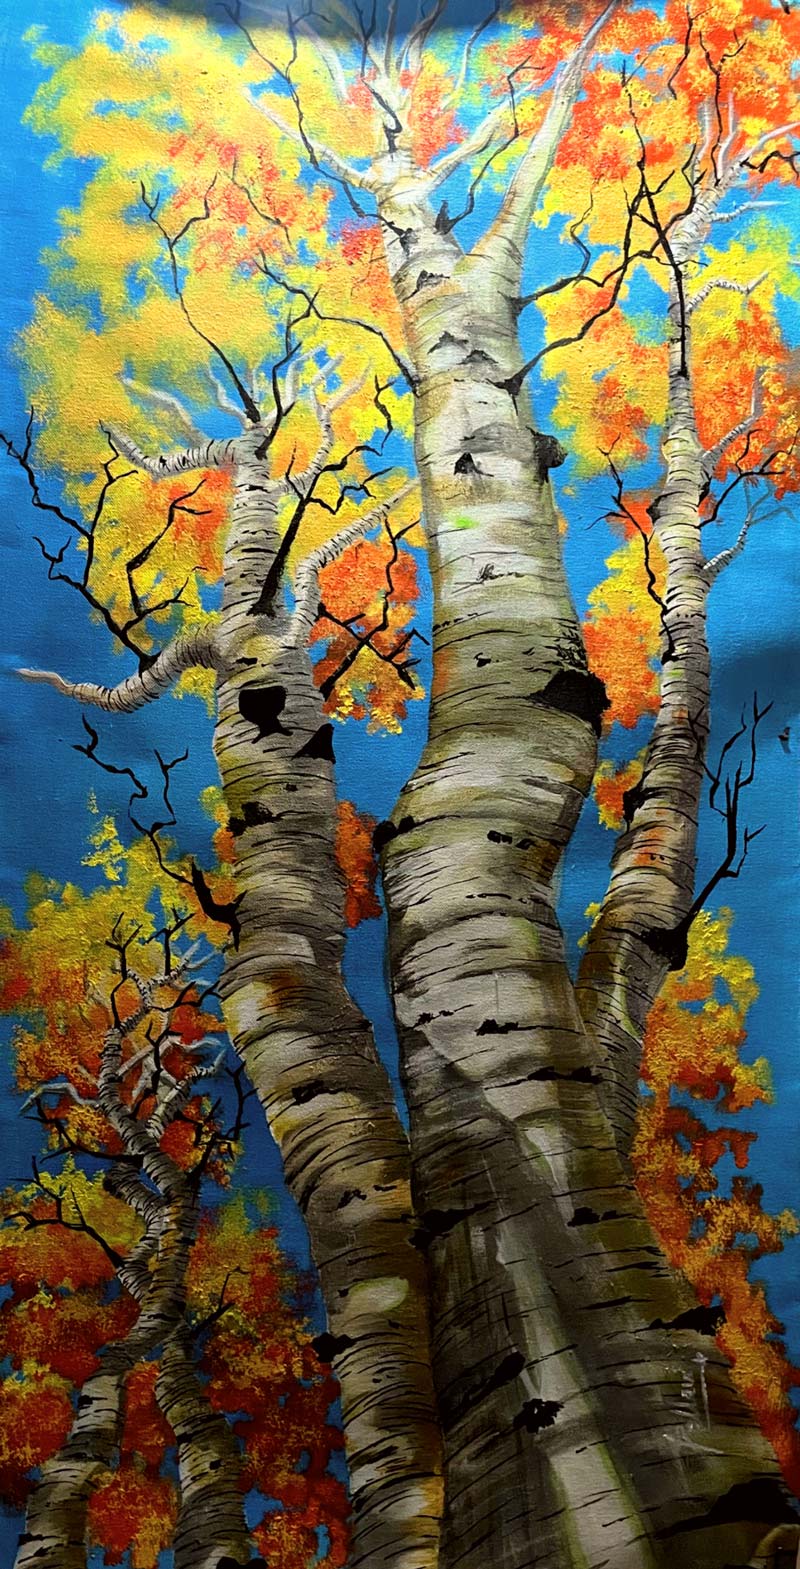 Figurative Painting with Acrylic on Canvas "Birch trees" art by Pallavi Singhal